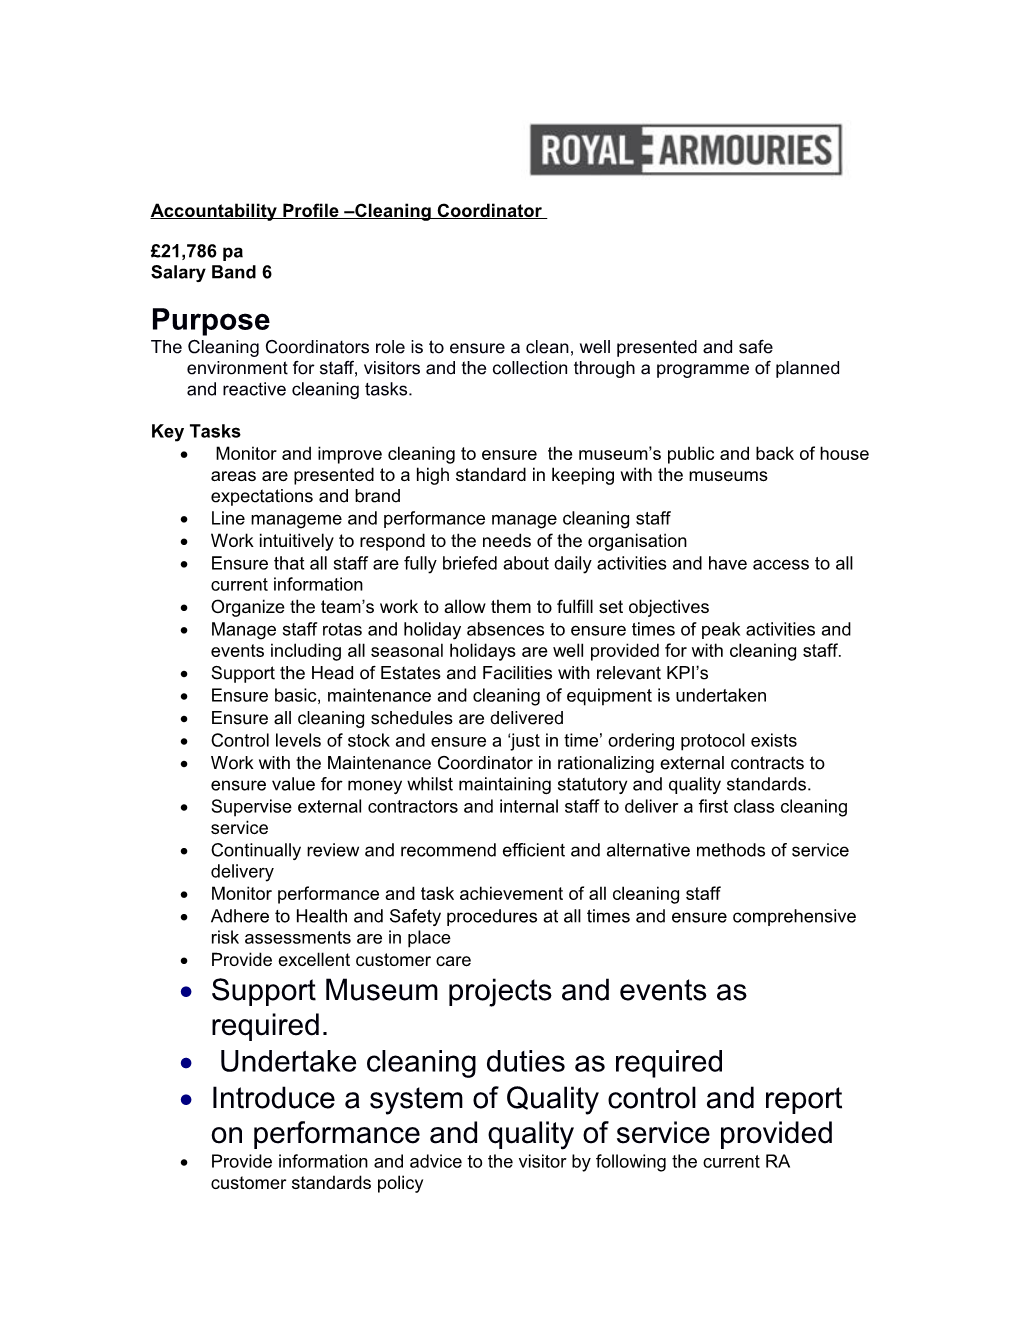 Accountability Profile Cleaning Coordinator